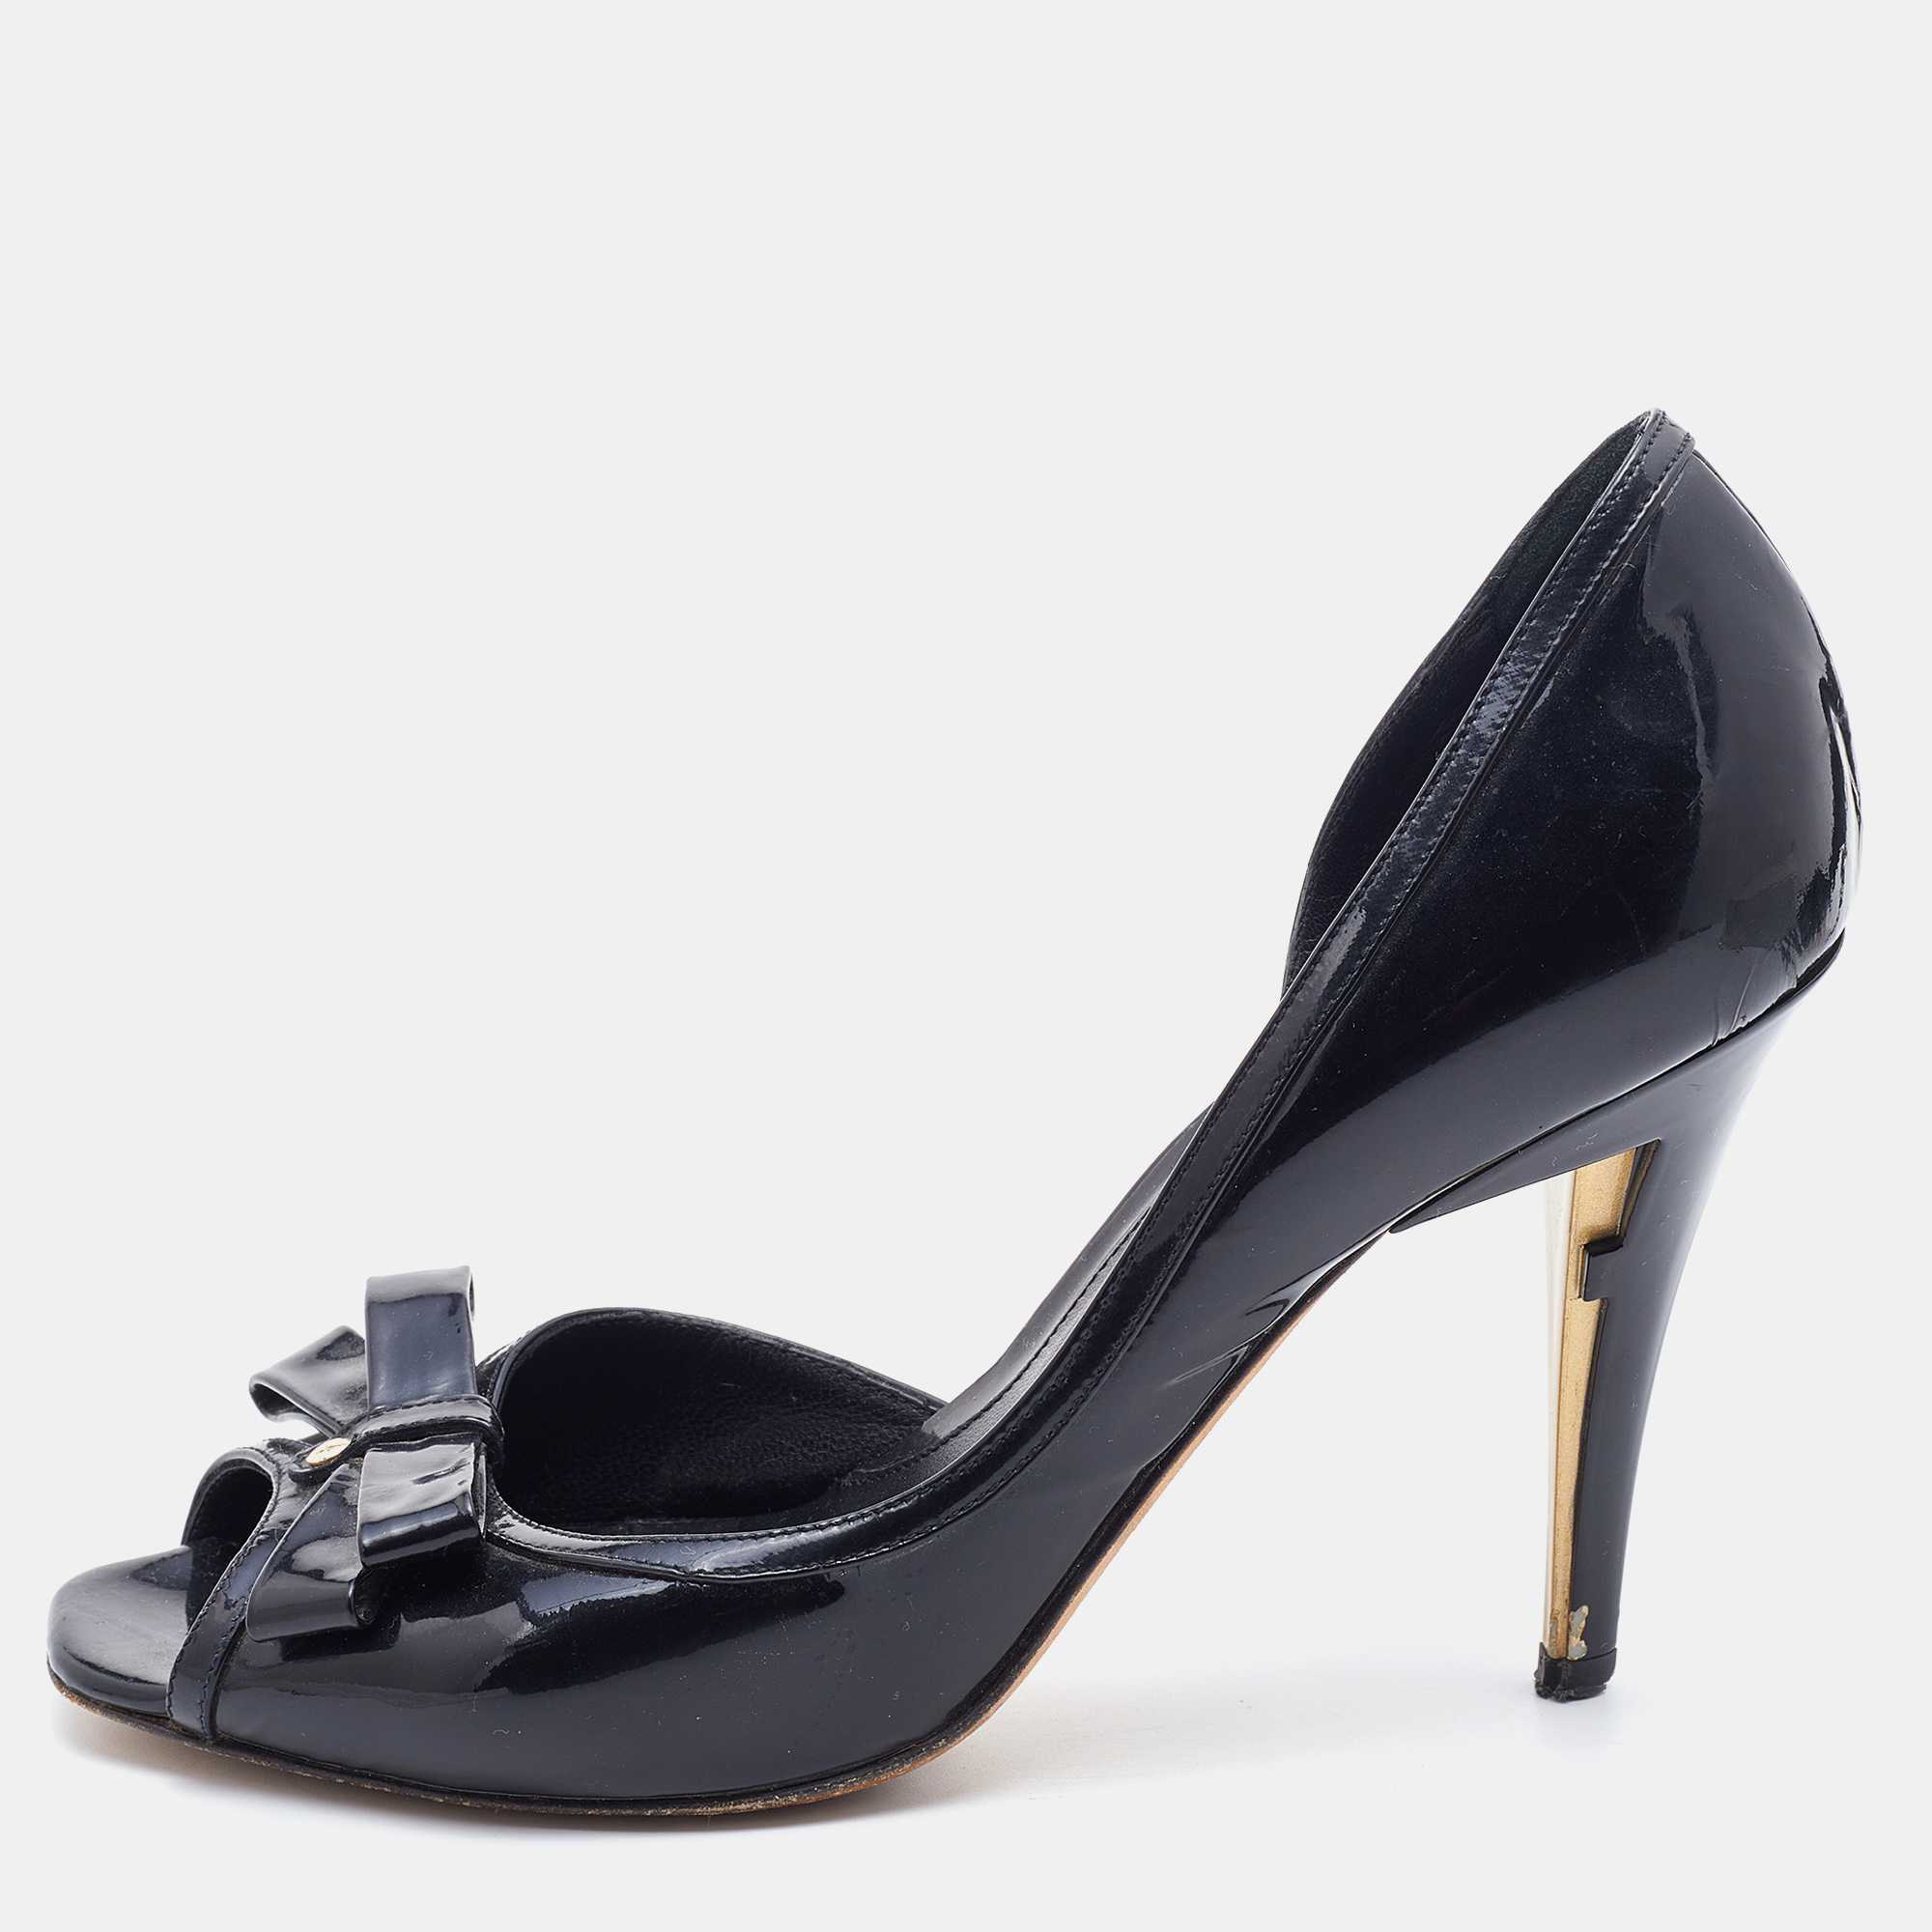 Pre-owned Fendi Black Patent Leather Bow Peep Toe D'orsay Pumps Size 38.5